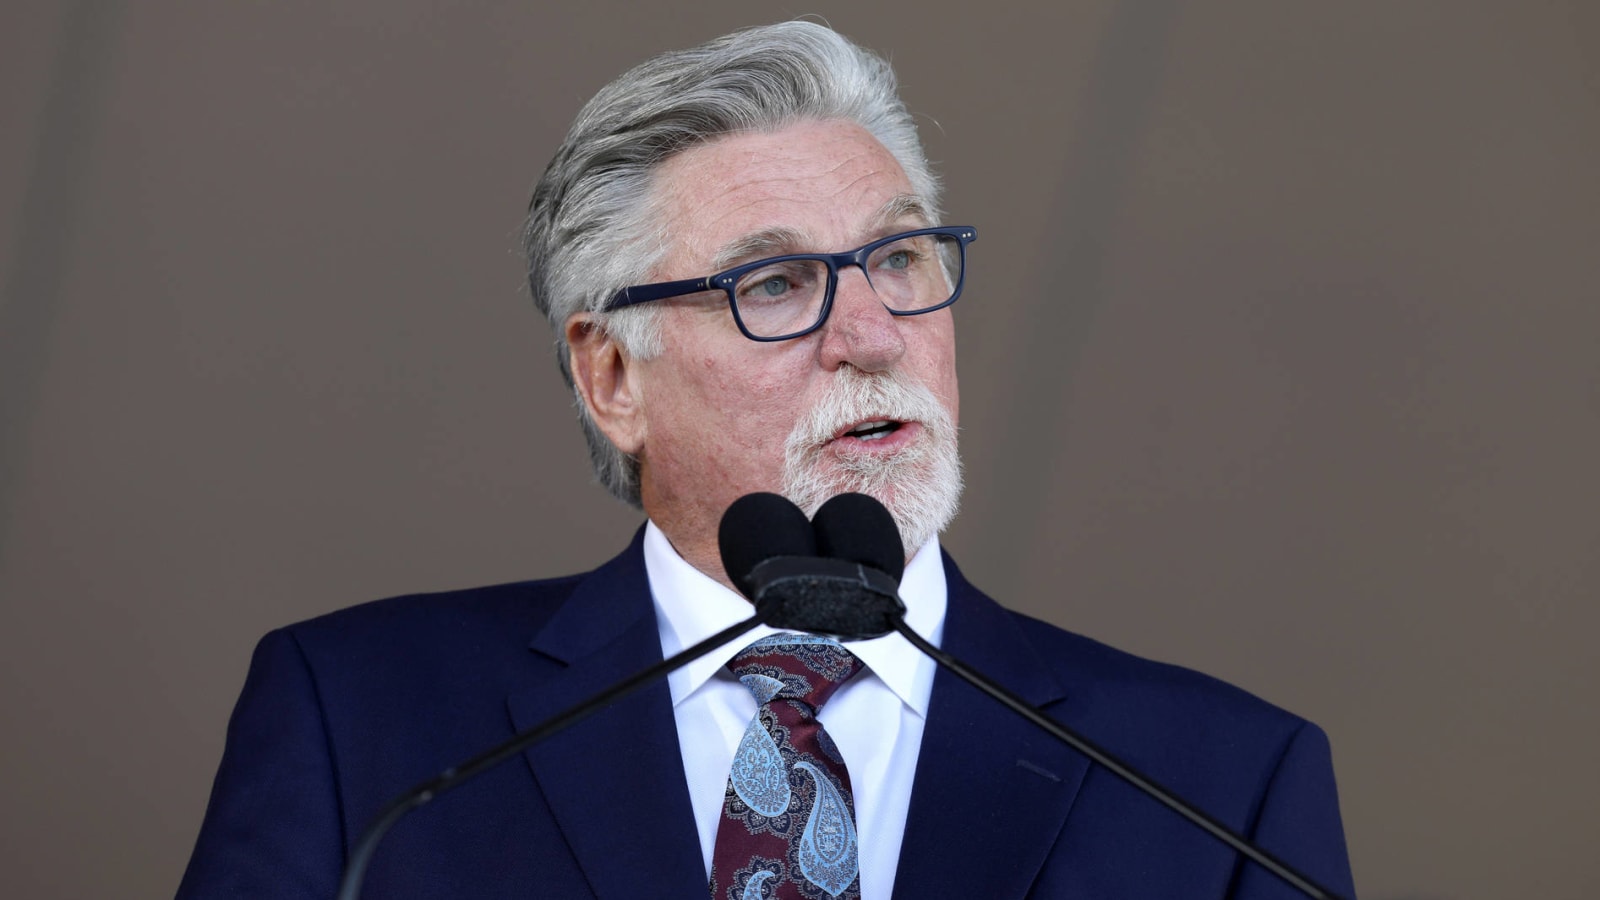 Jack Morris suspended from Tigers broadcasts over Ohtani remarks